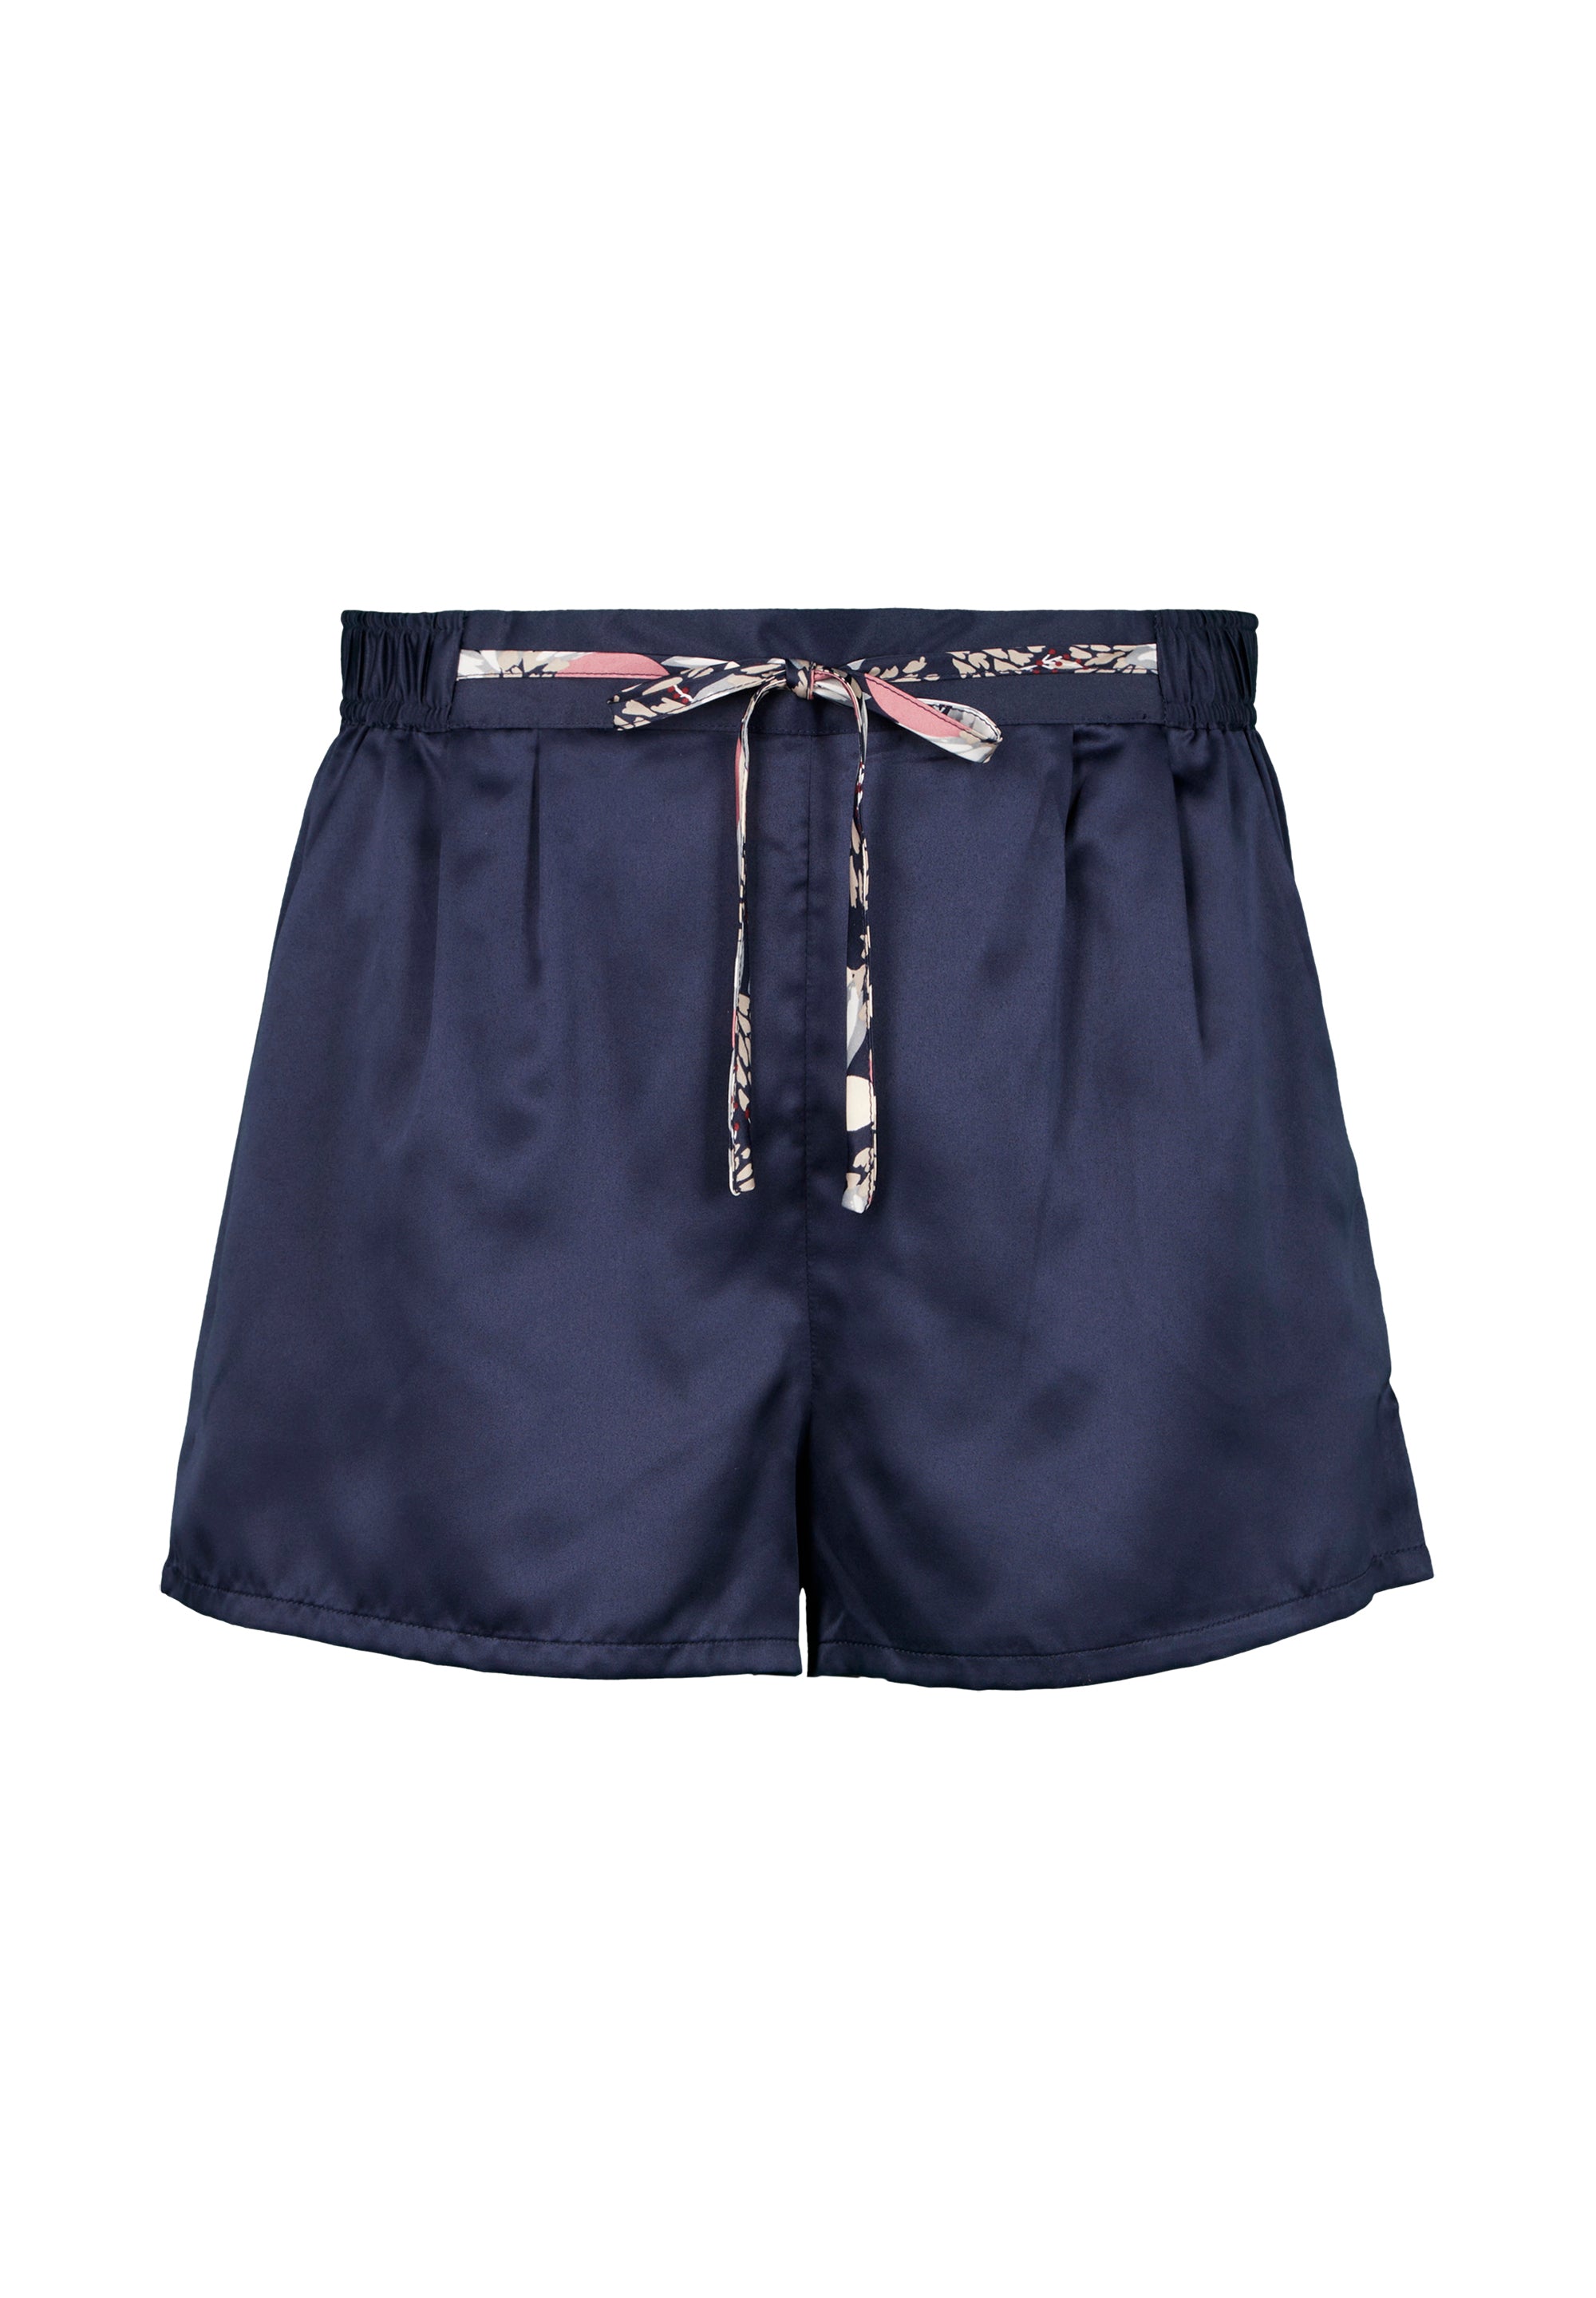 Shorts In Style Navy Blue 